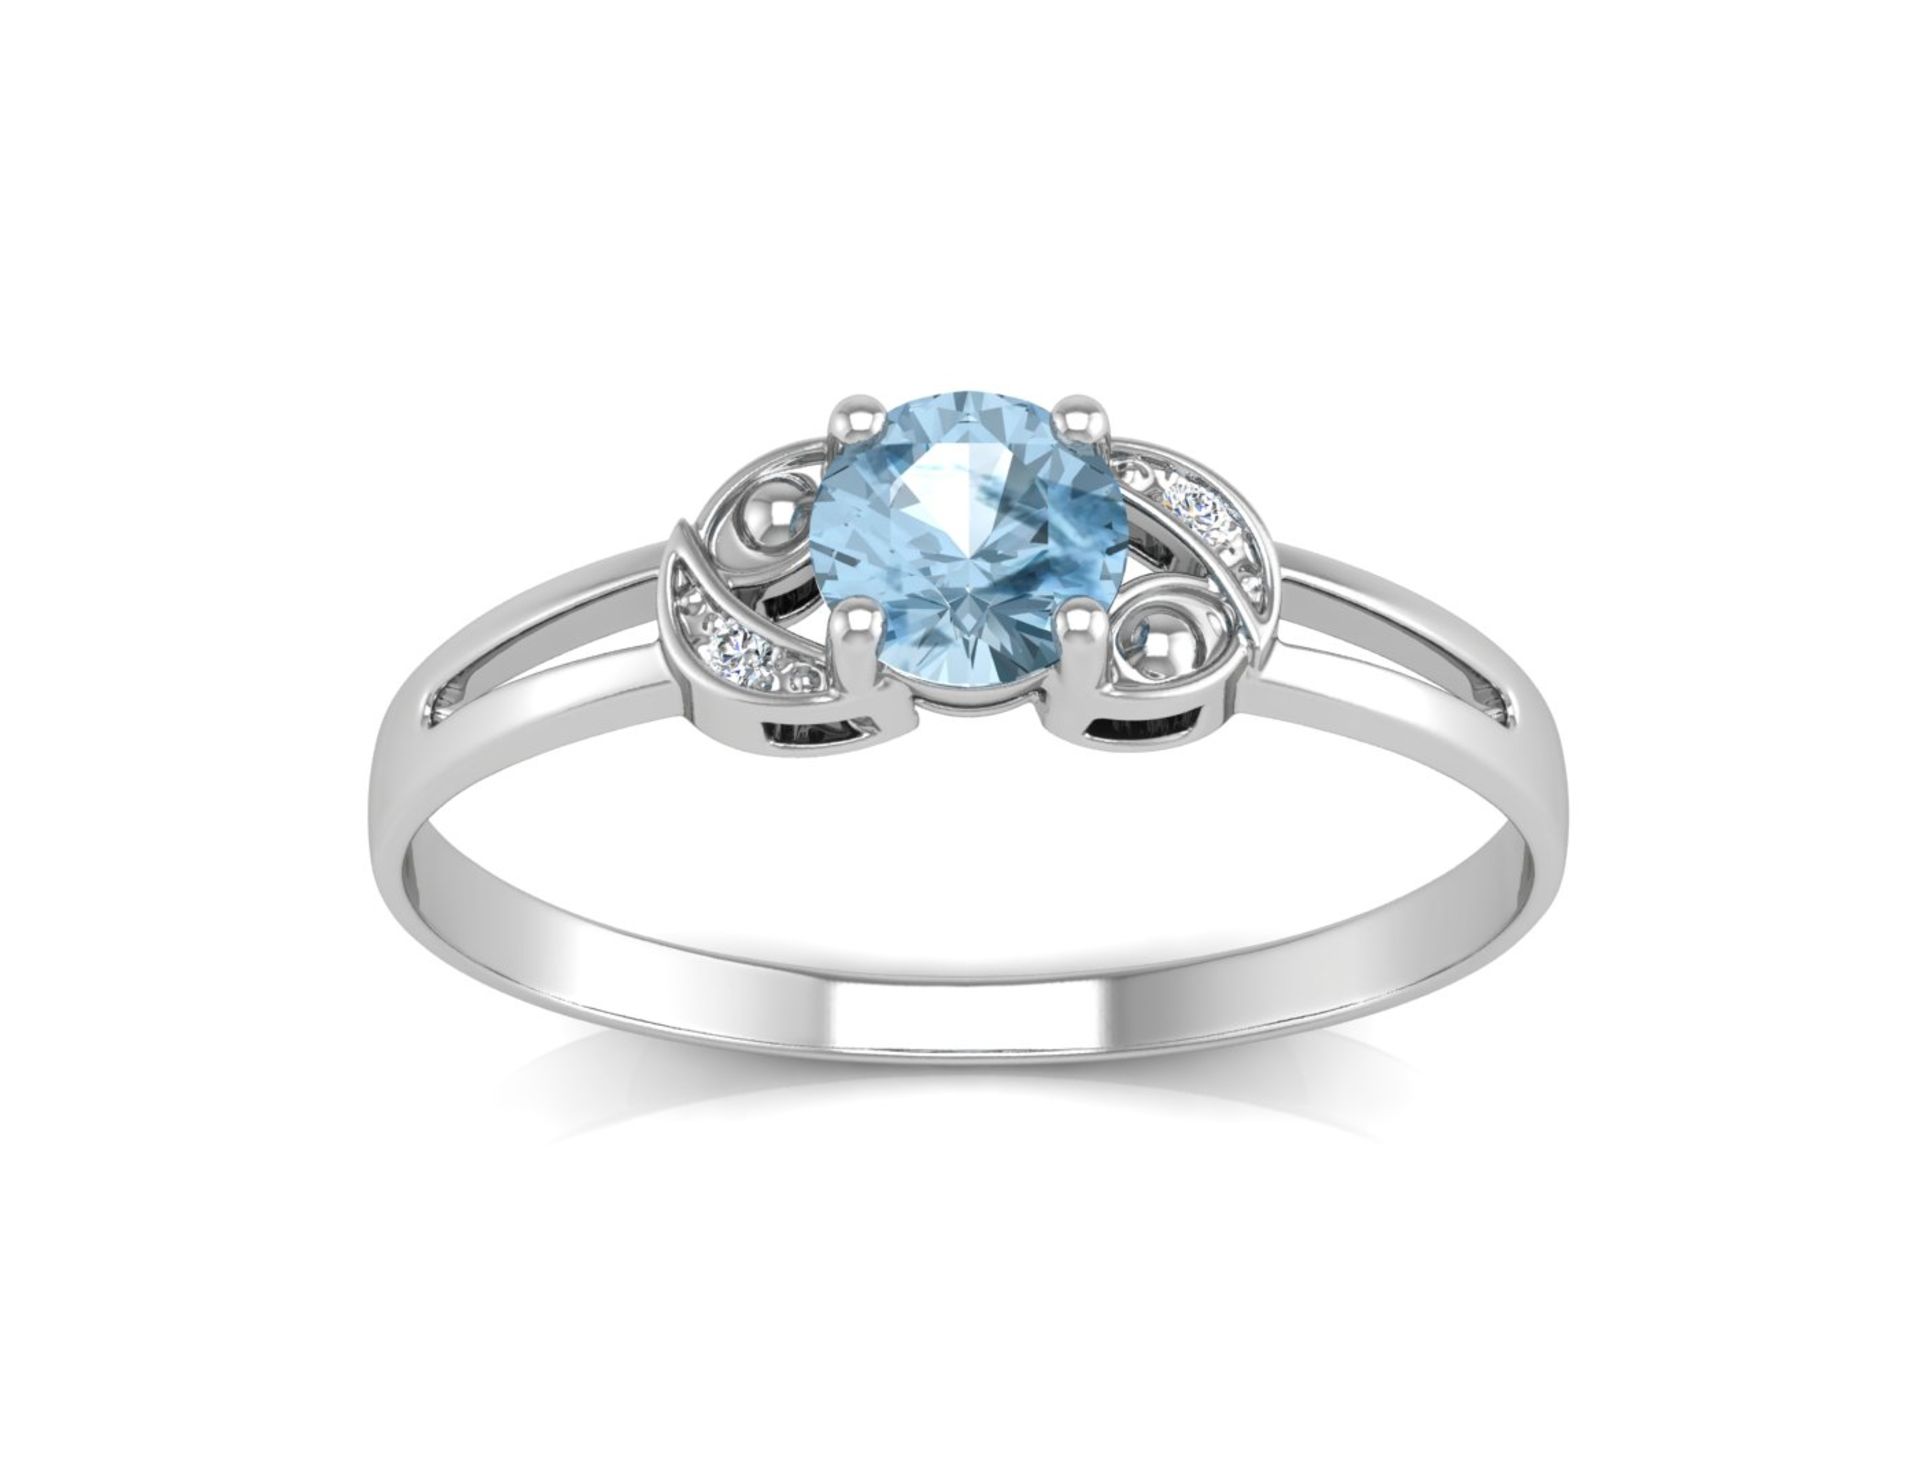 9ct White Gold Fancy Cluster Diamond And Blue Topaz Ring 0.01 Carats - Valued by GIE £800.00 - 9ct - Image 3 of 5